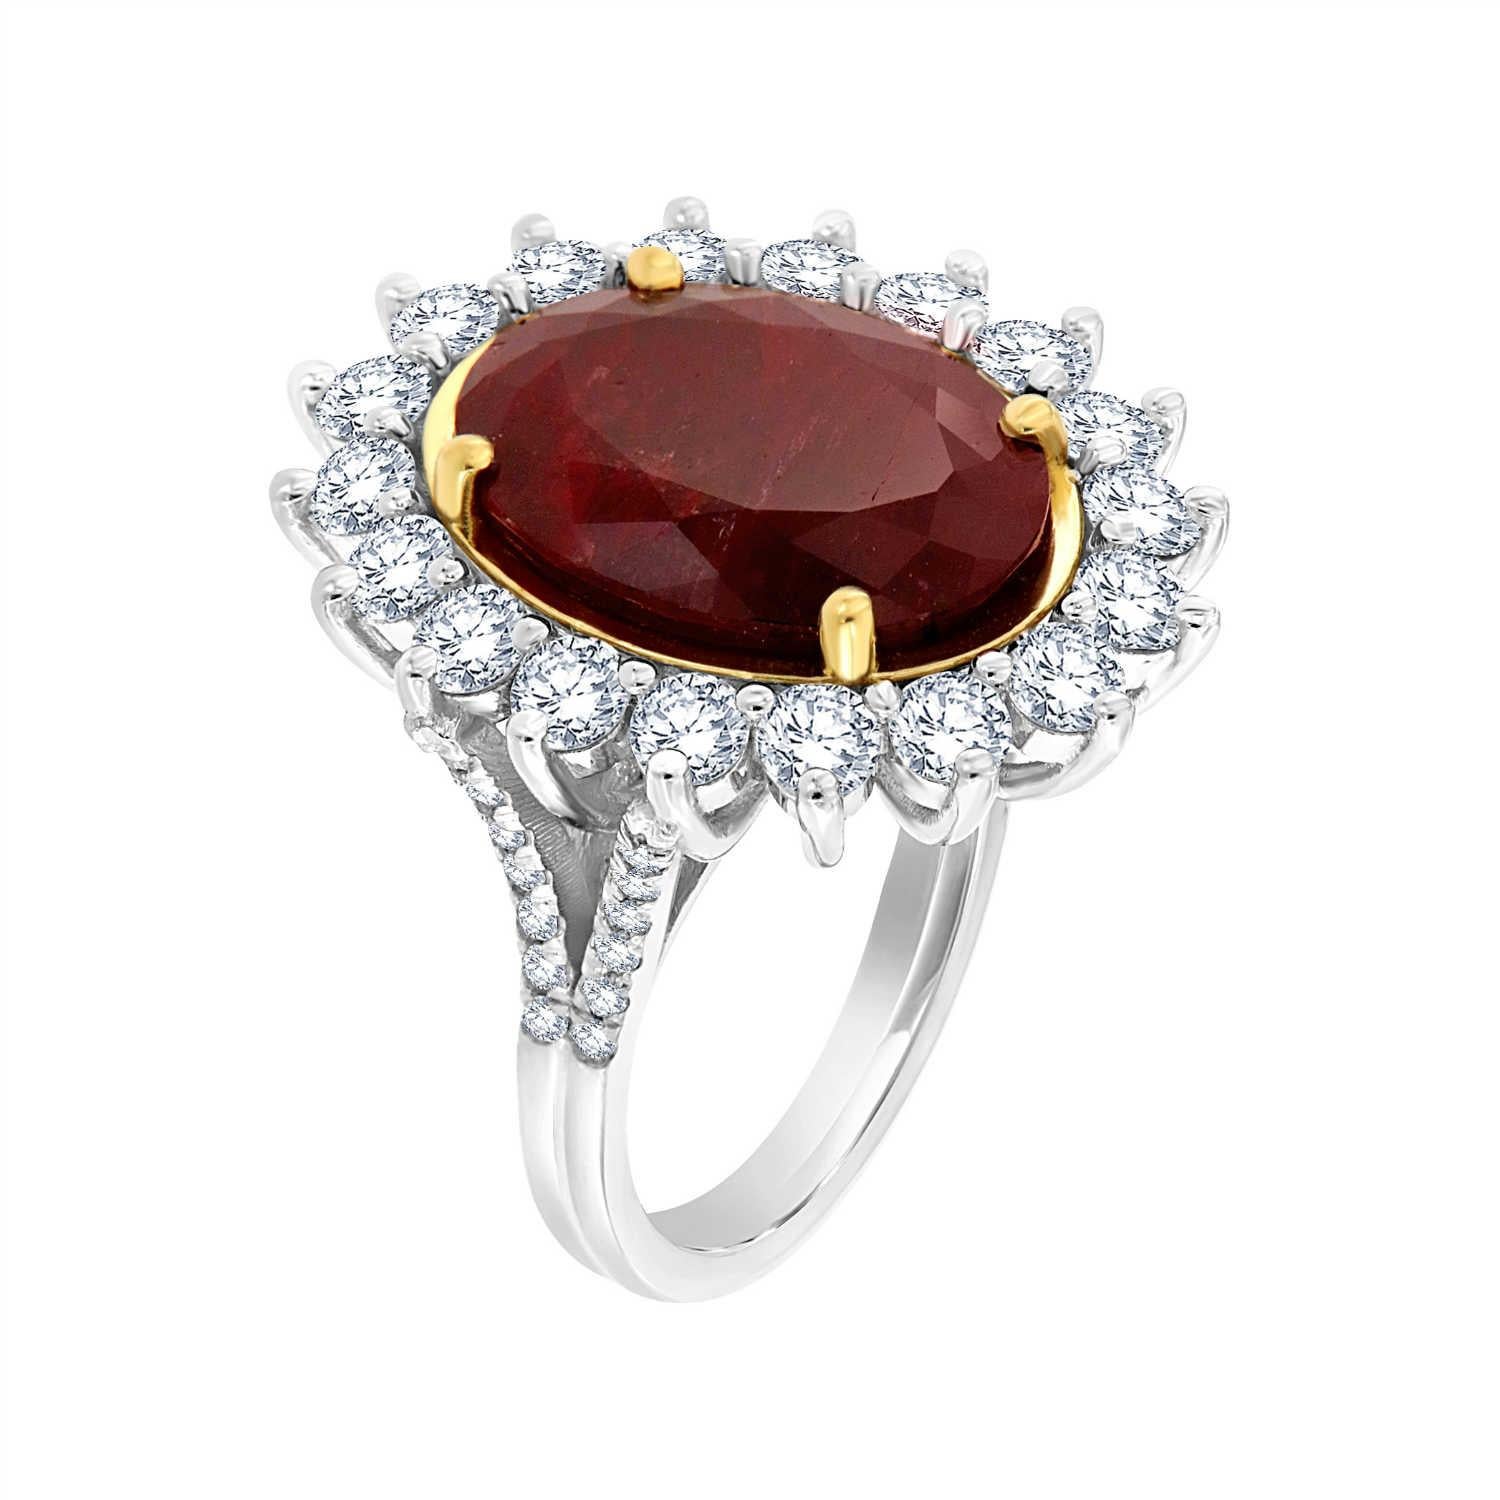 This one-of-a-kind ring features a rare un-heated natural 9.67 carat Red Ruby oval shape circled by eighteen (18) brilliant round diamonds and two rows of round diamond micro-prong set on a split shank band. The Ruby is deep red color and has some